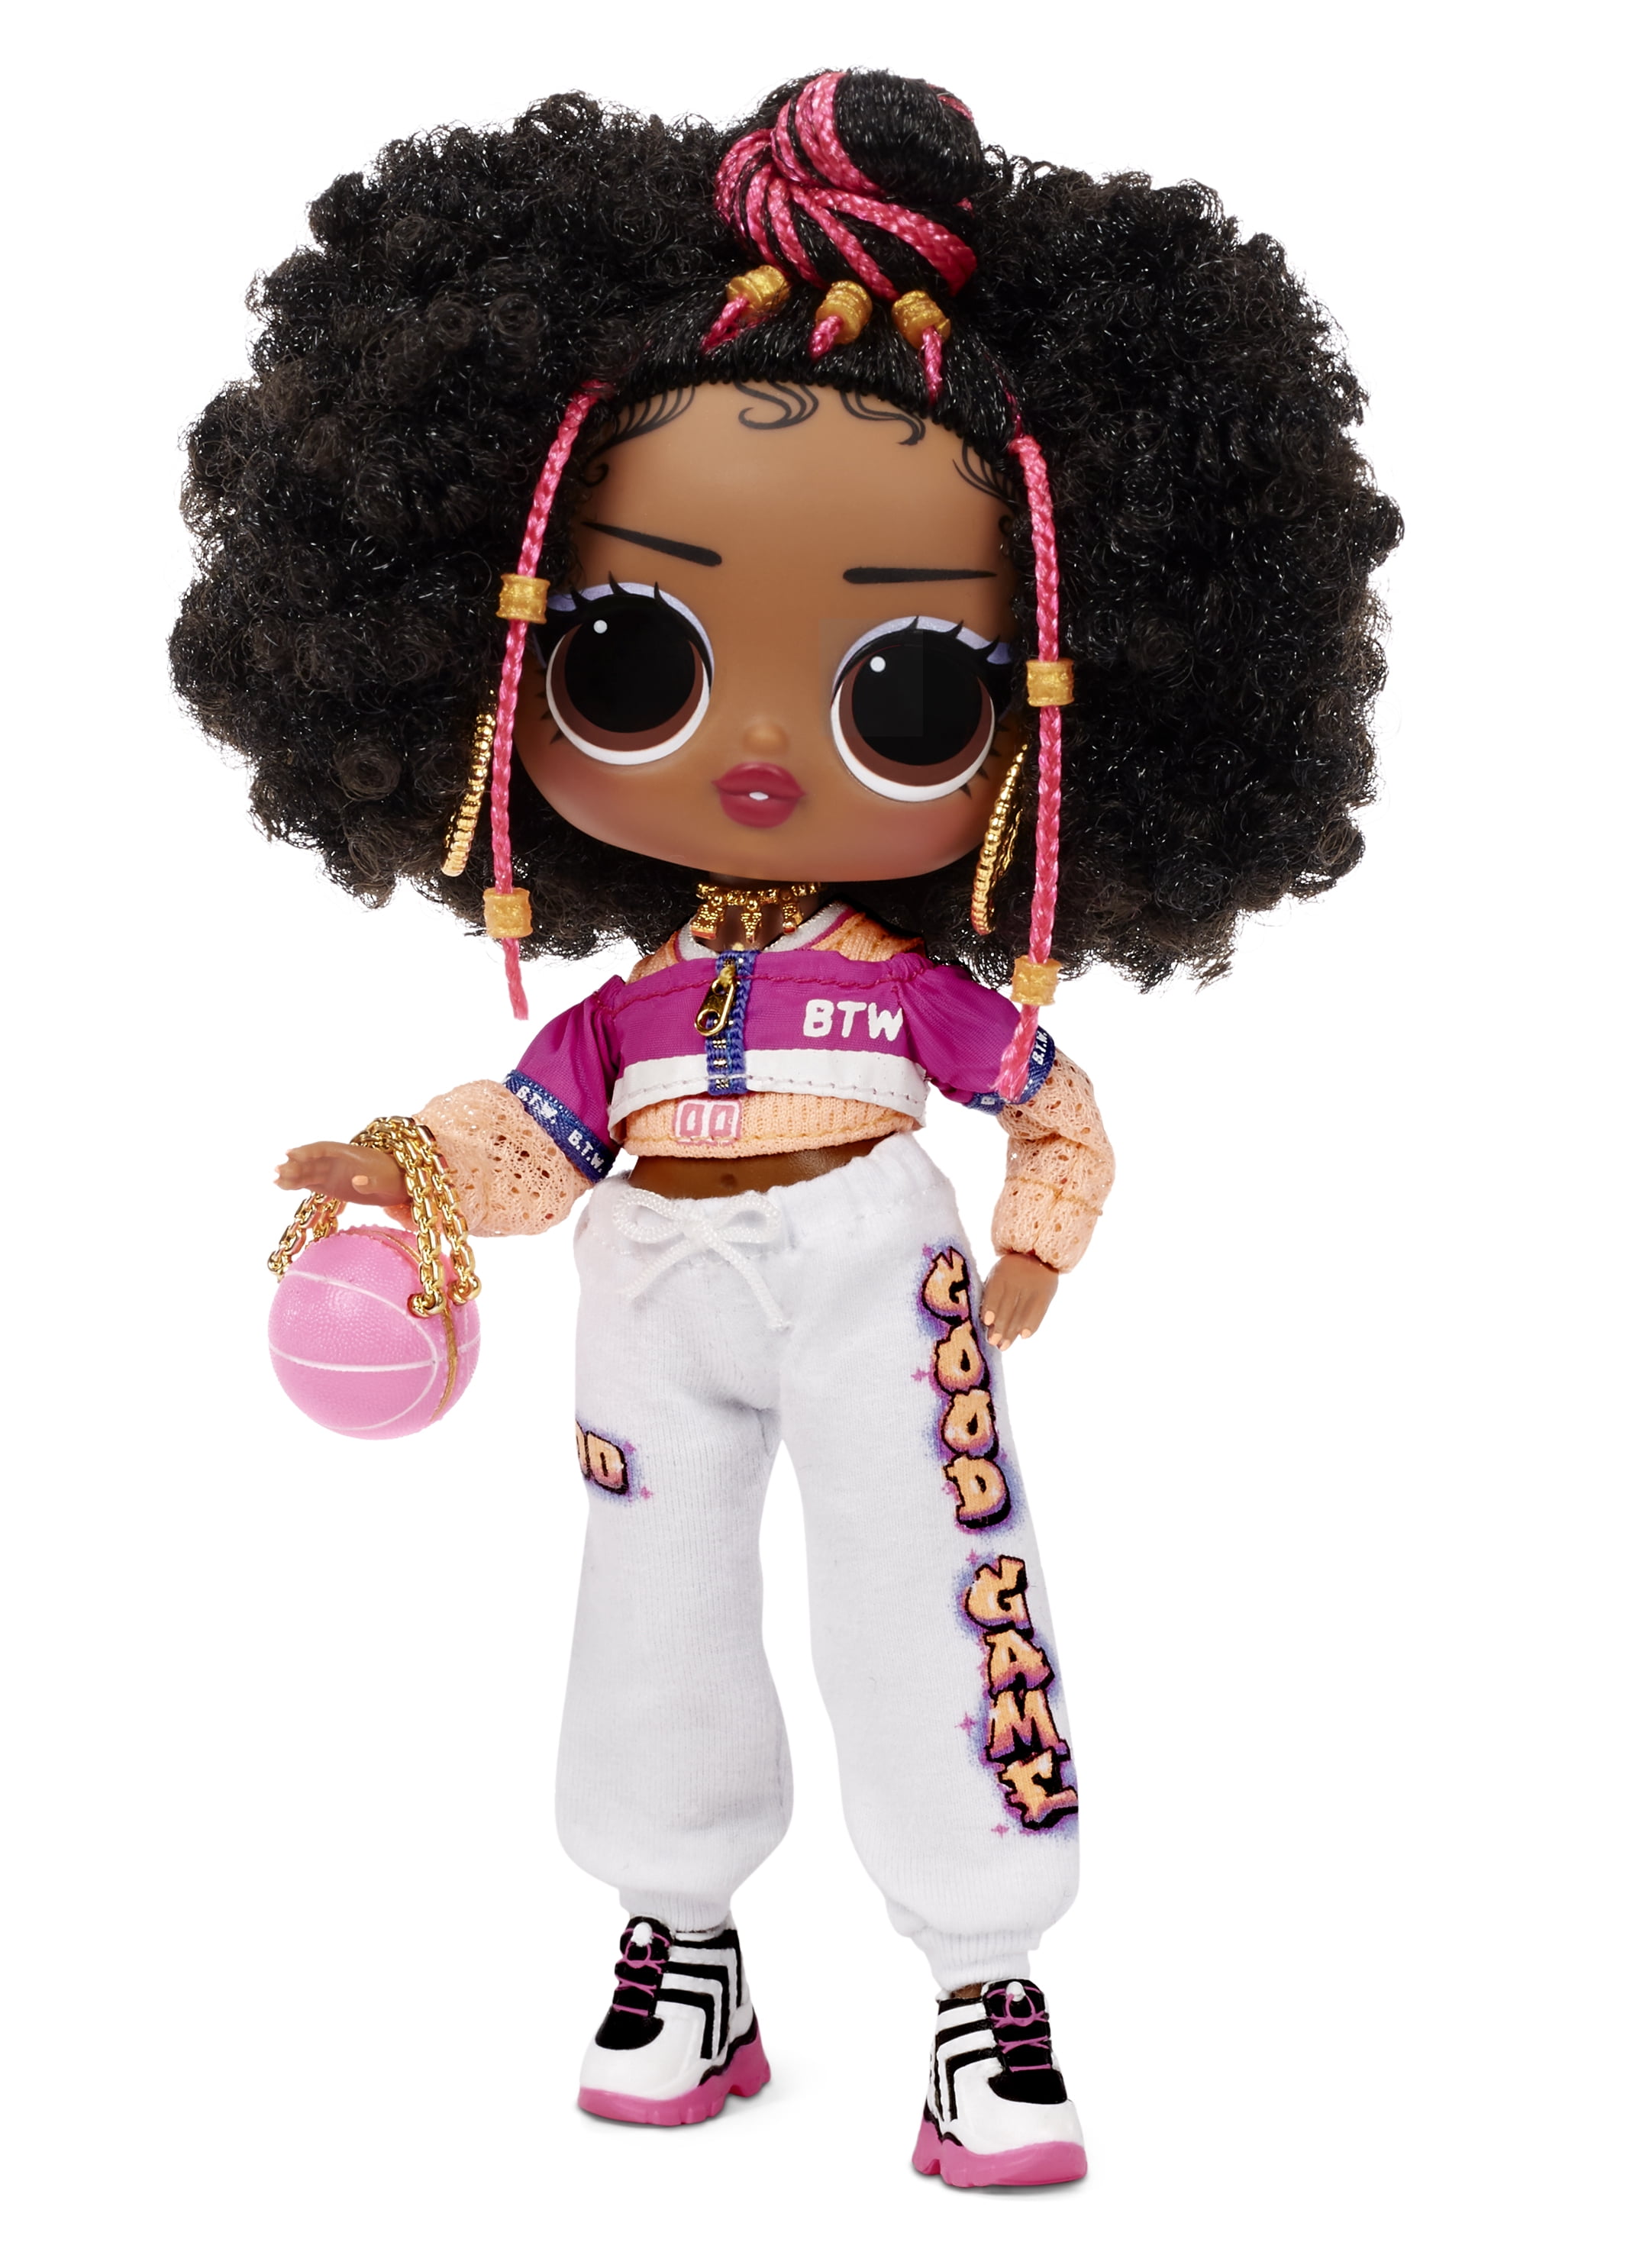 Surprise Tweens Doll Assorted By Surprise! At Fleet Farm | lupon.gov.ph